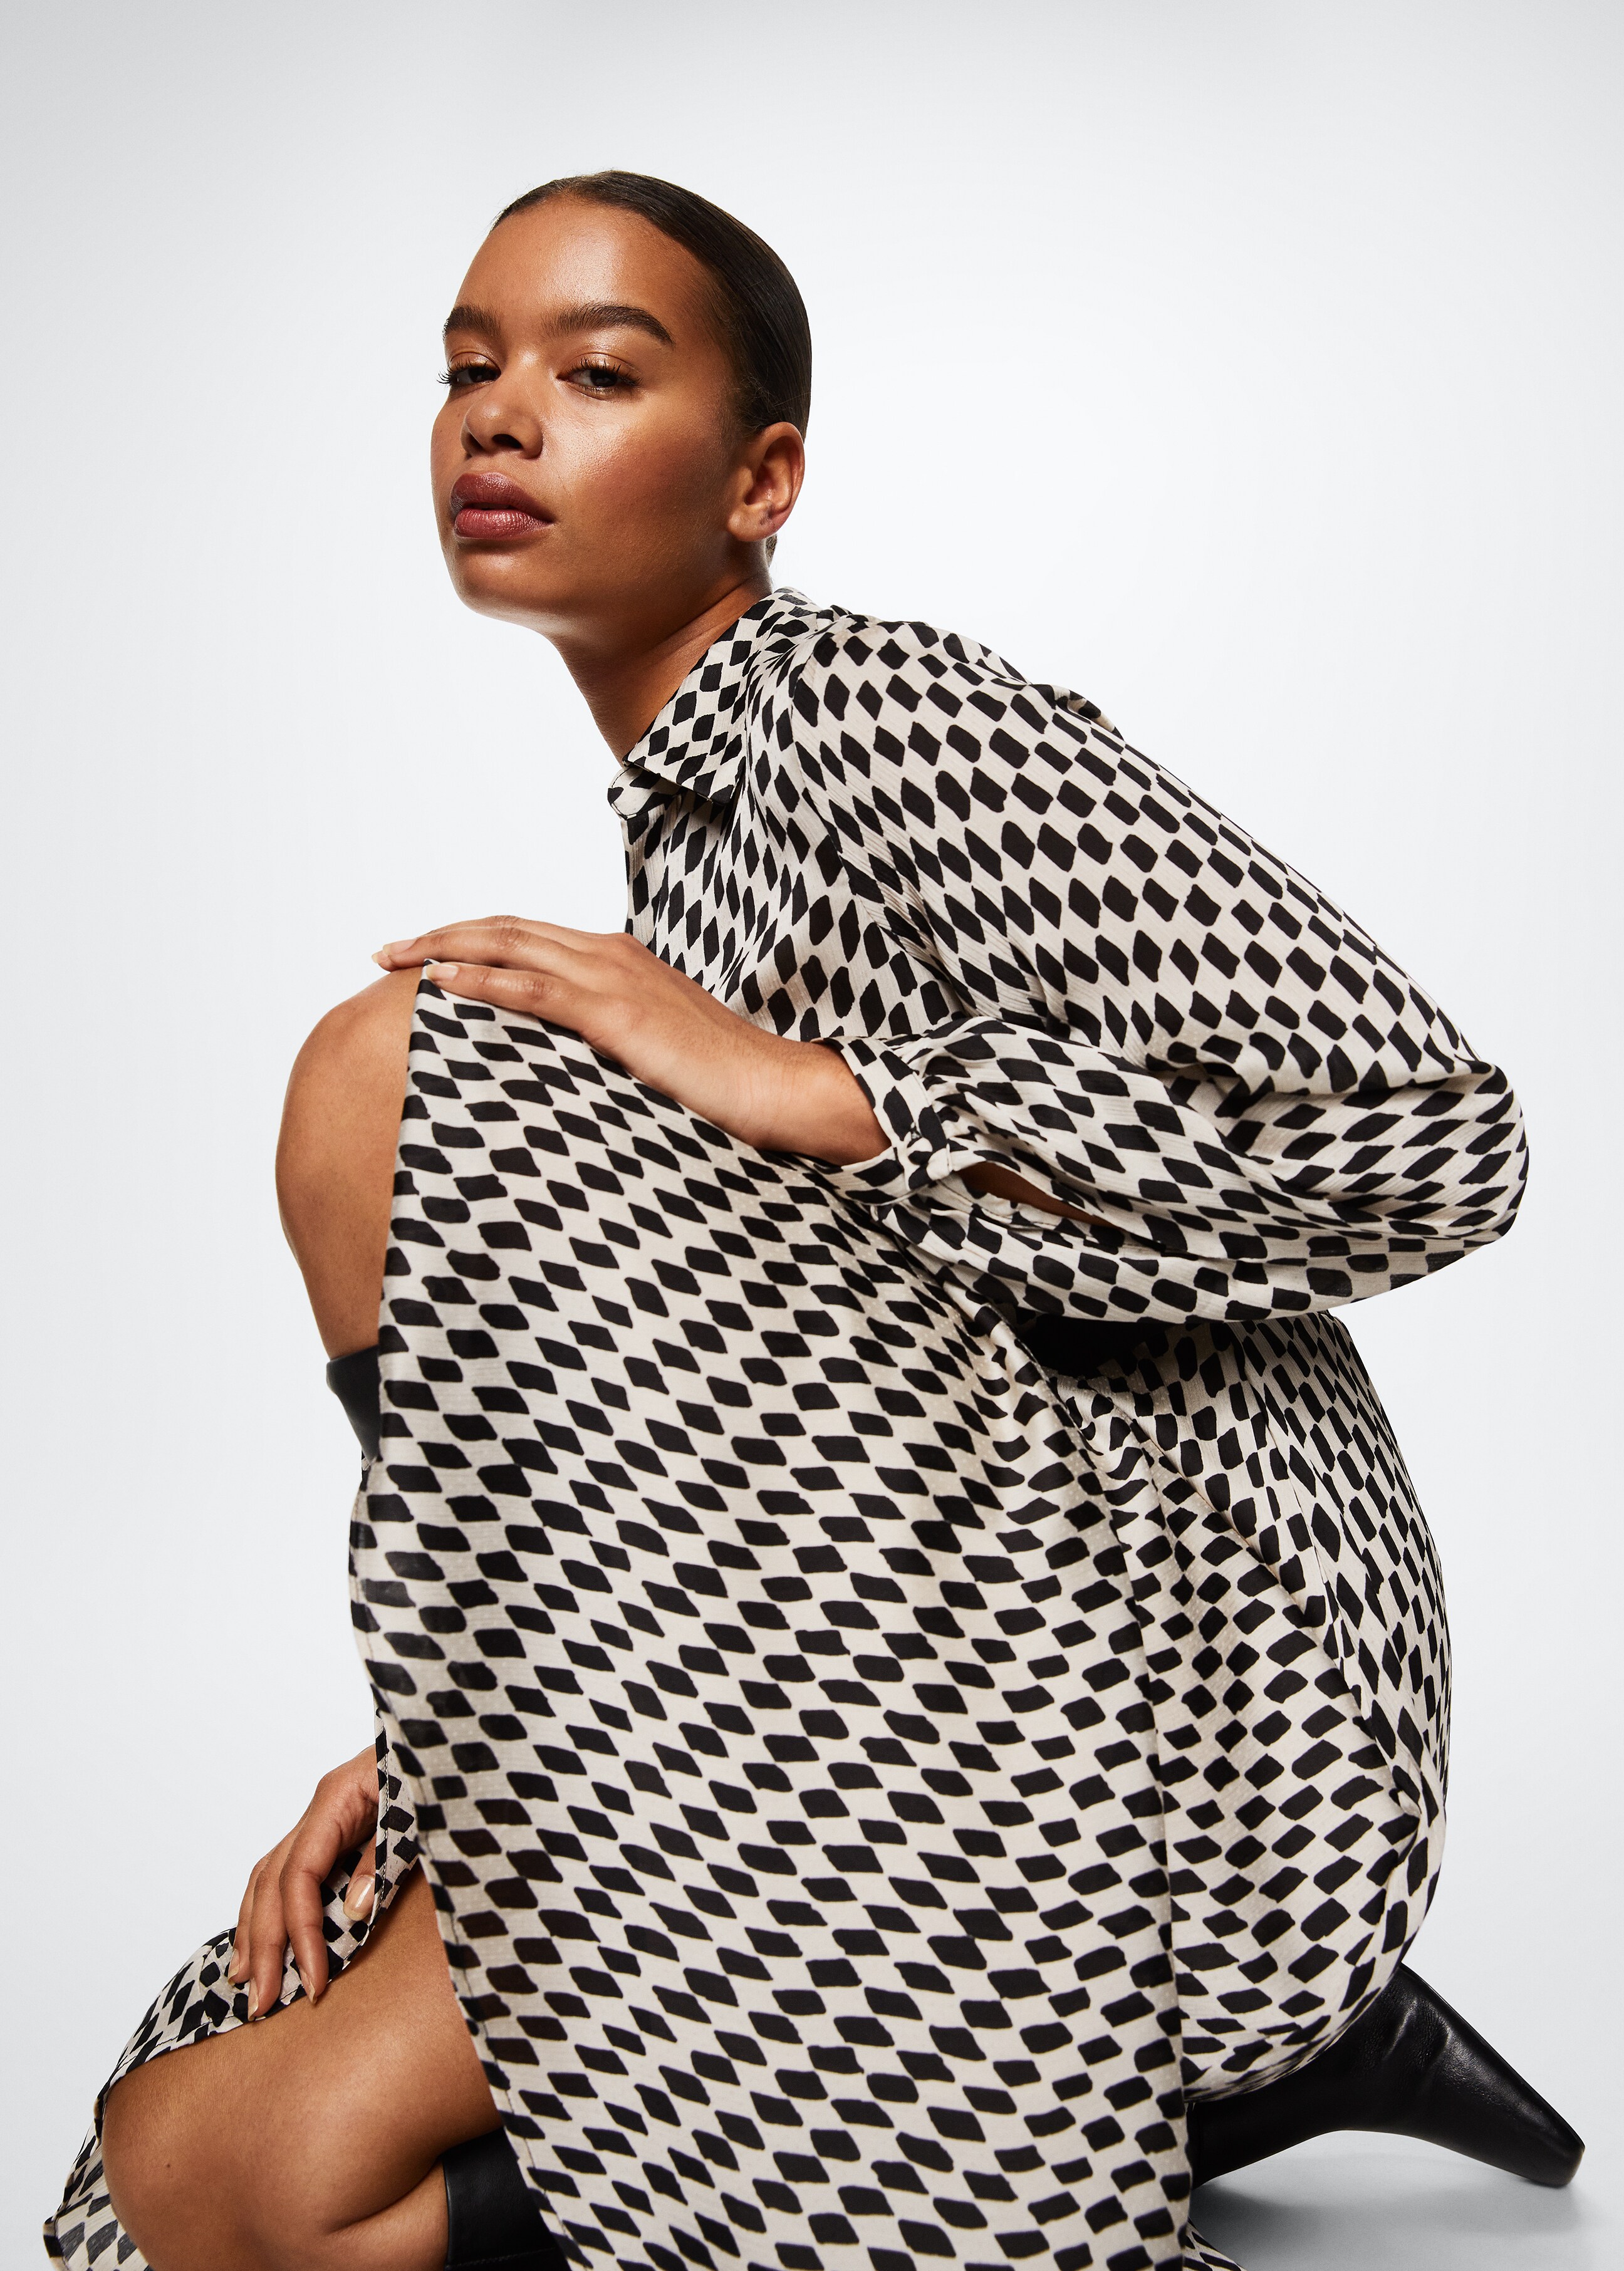 Rhombus pattern dress - Details of the article 4